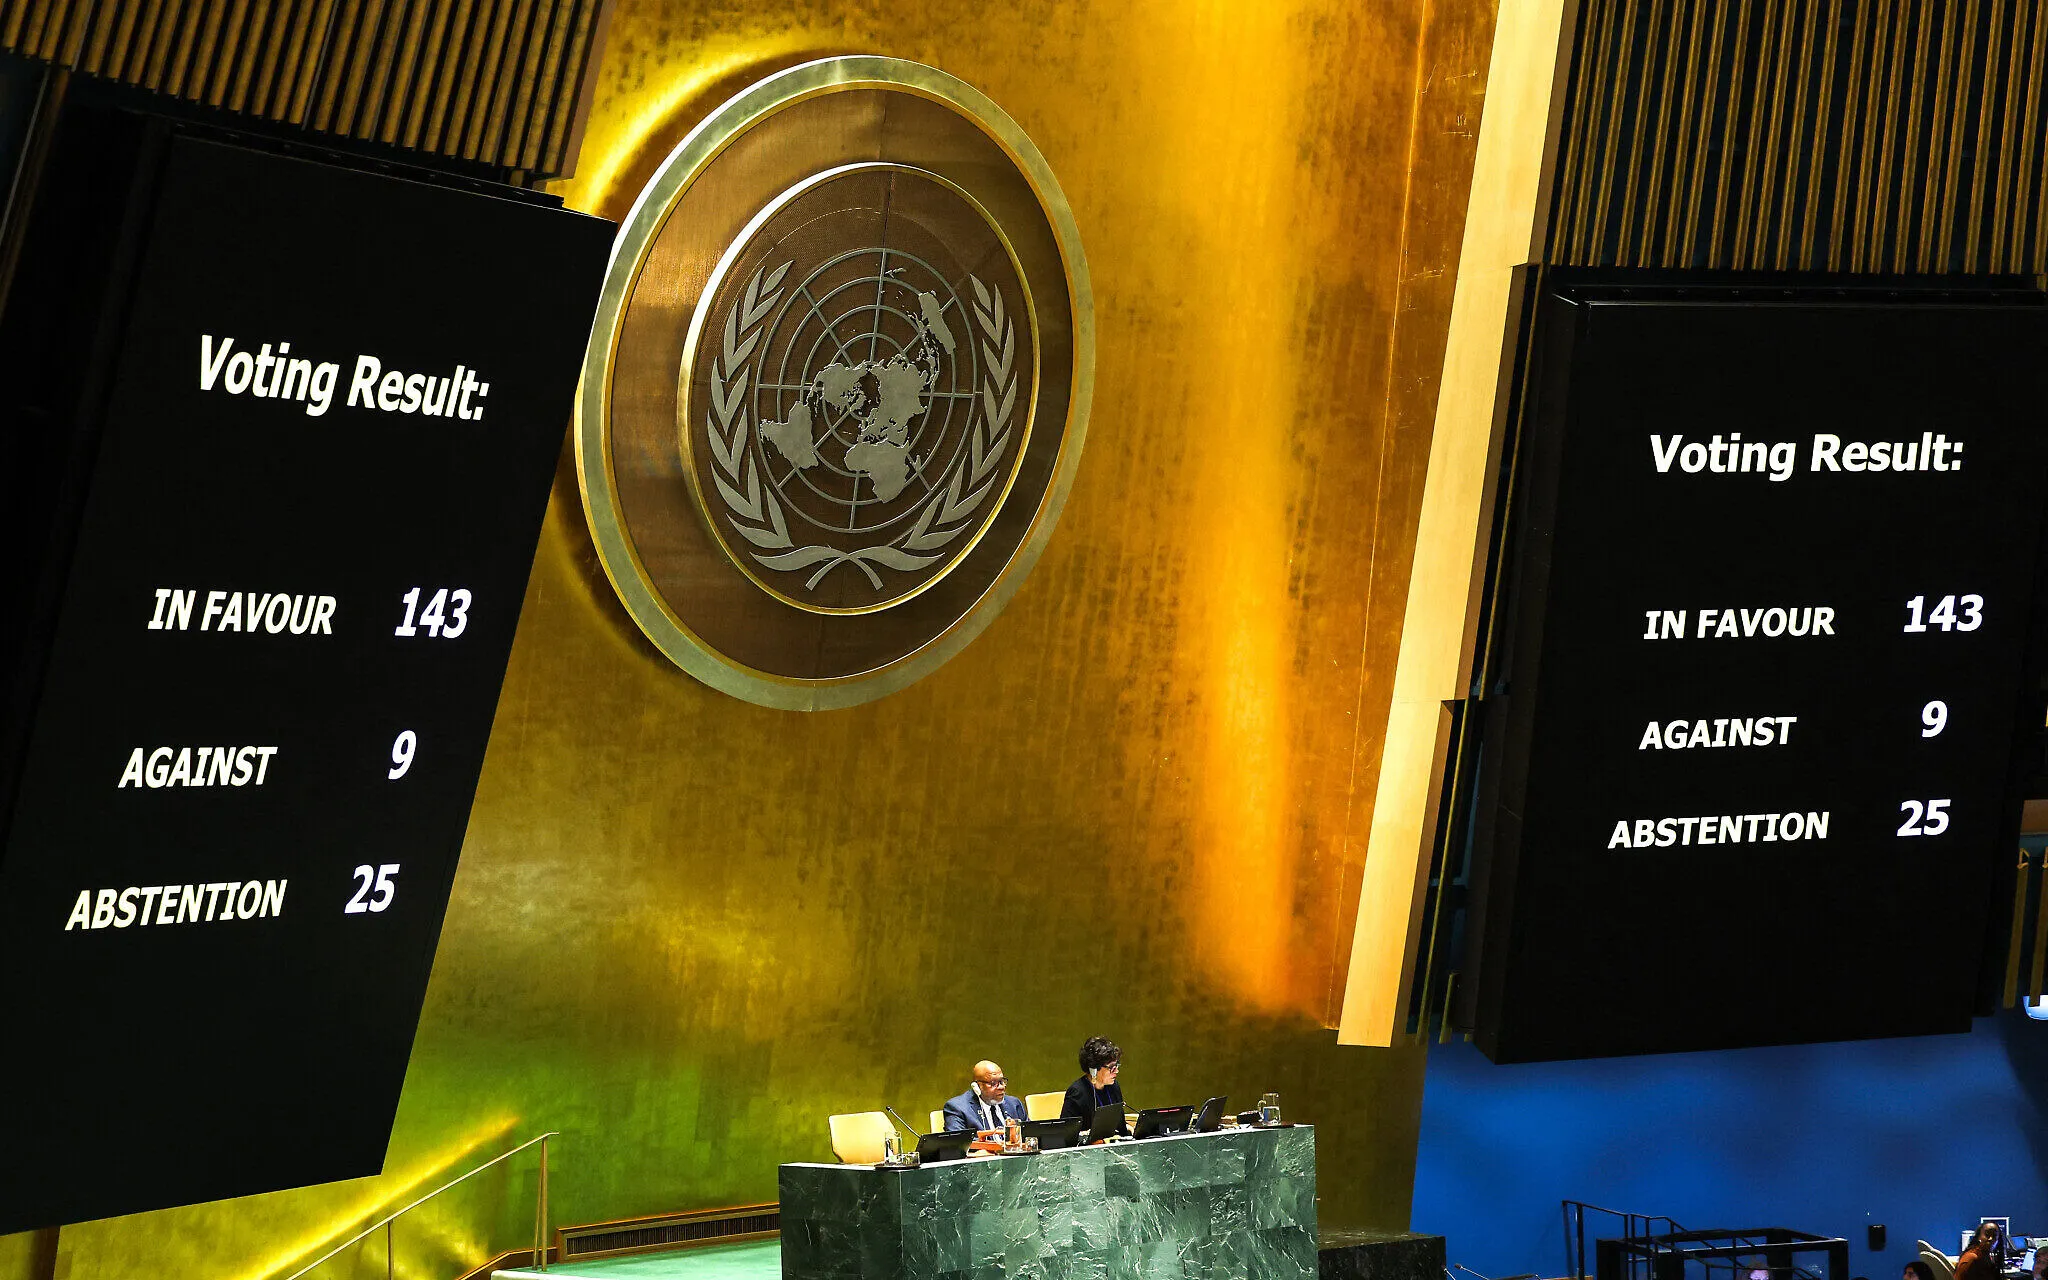 UN General Assembly Passes Resolution Backing Palestine Bid For Sovereign Statehood